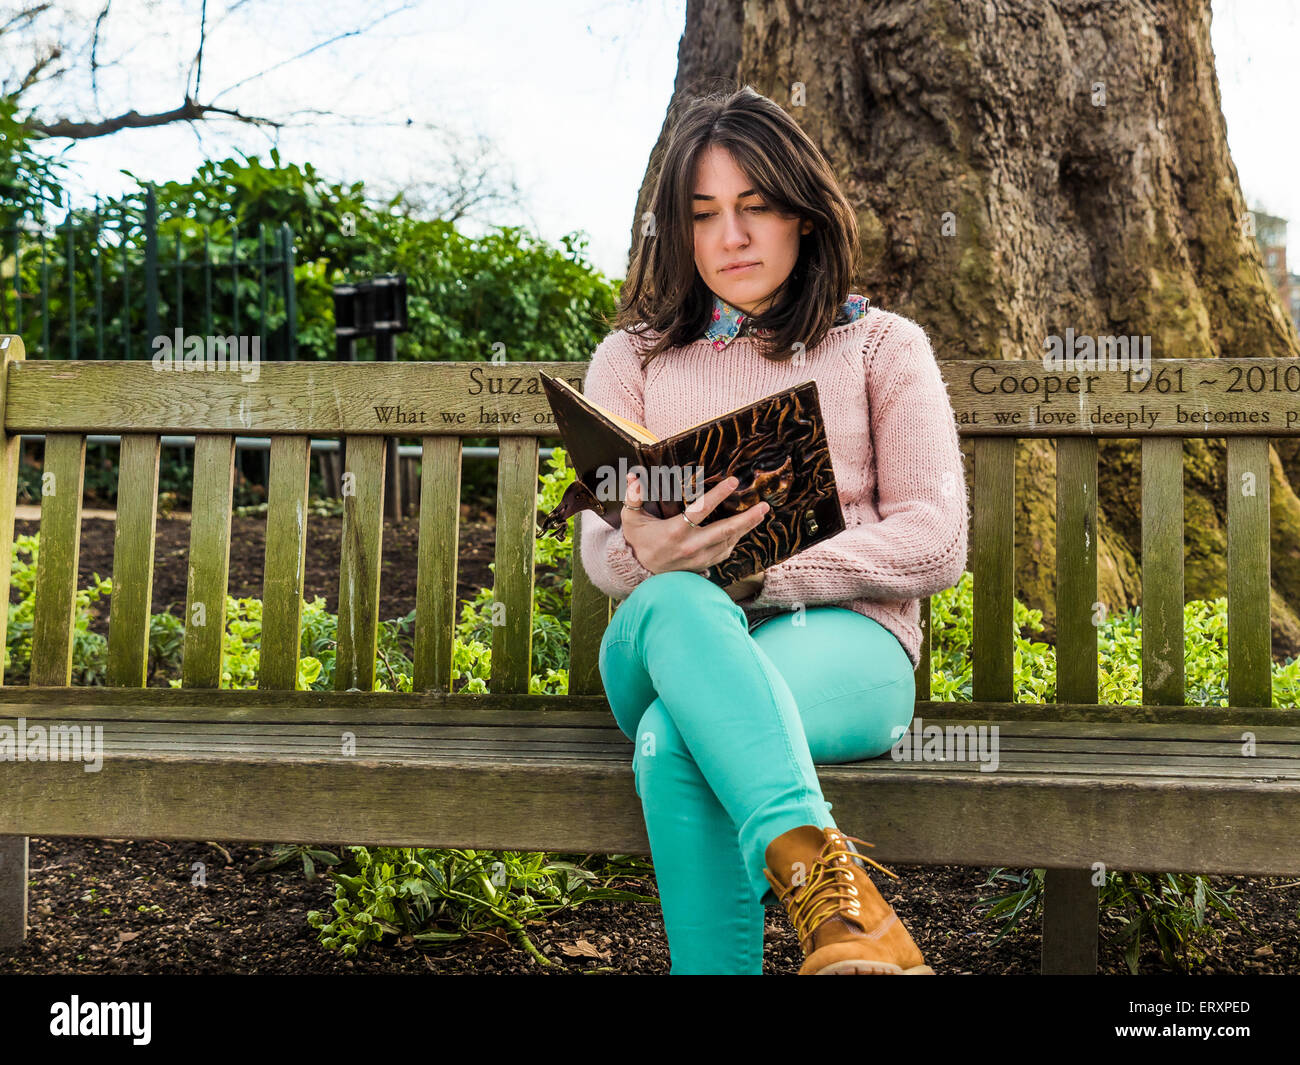 A Shot of a College Student Reading a Book on a Bench Stock Photo